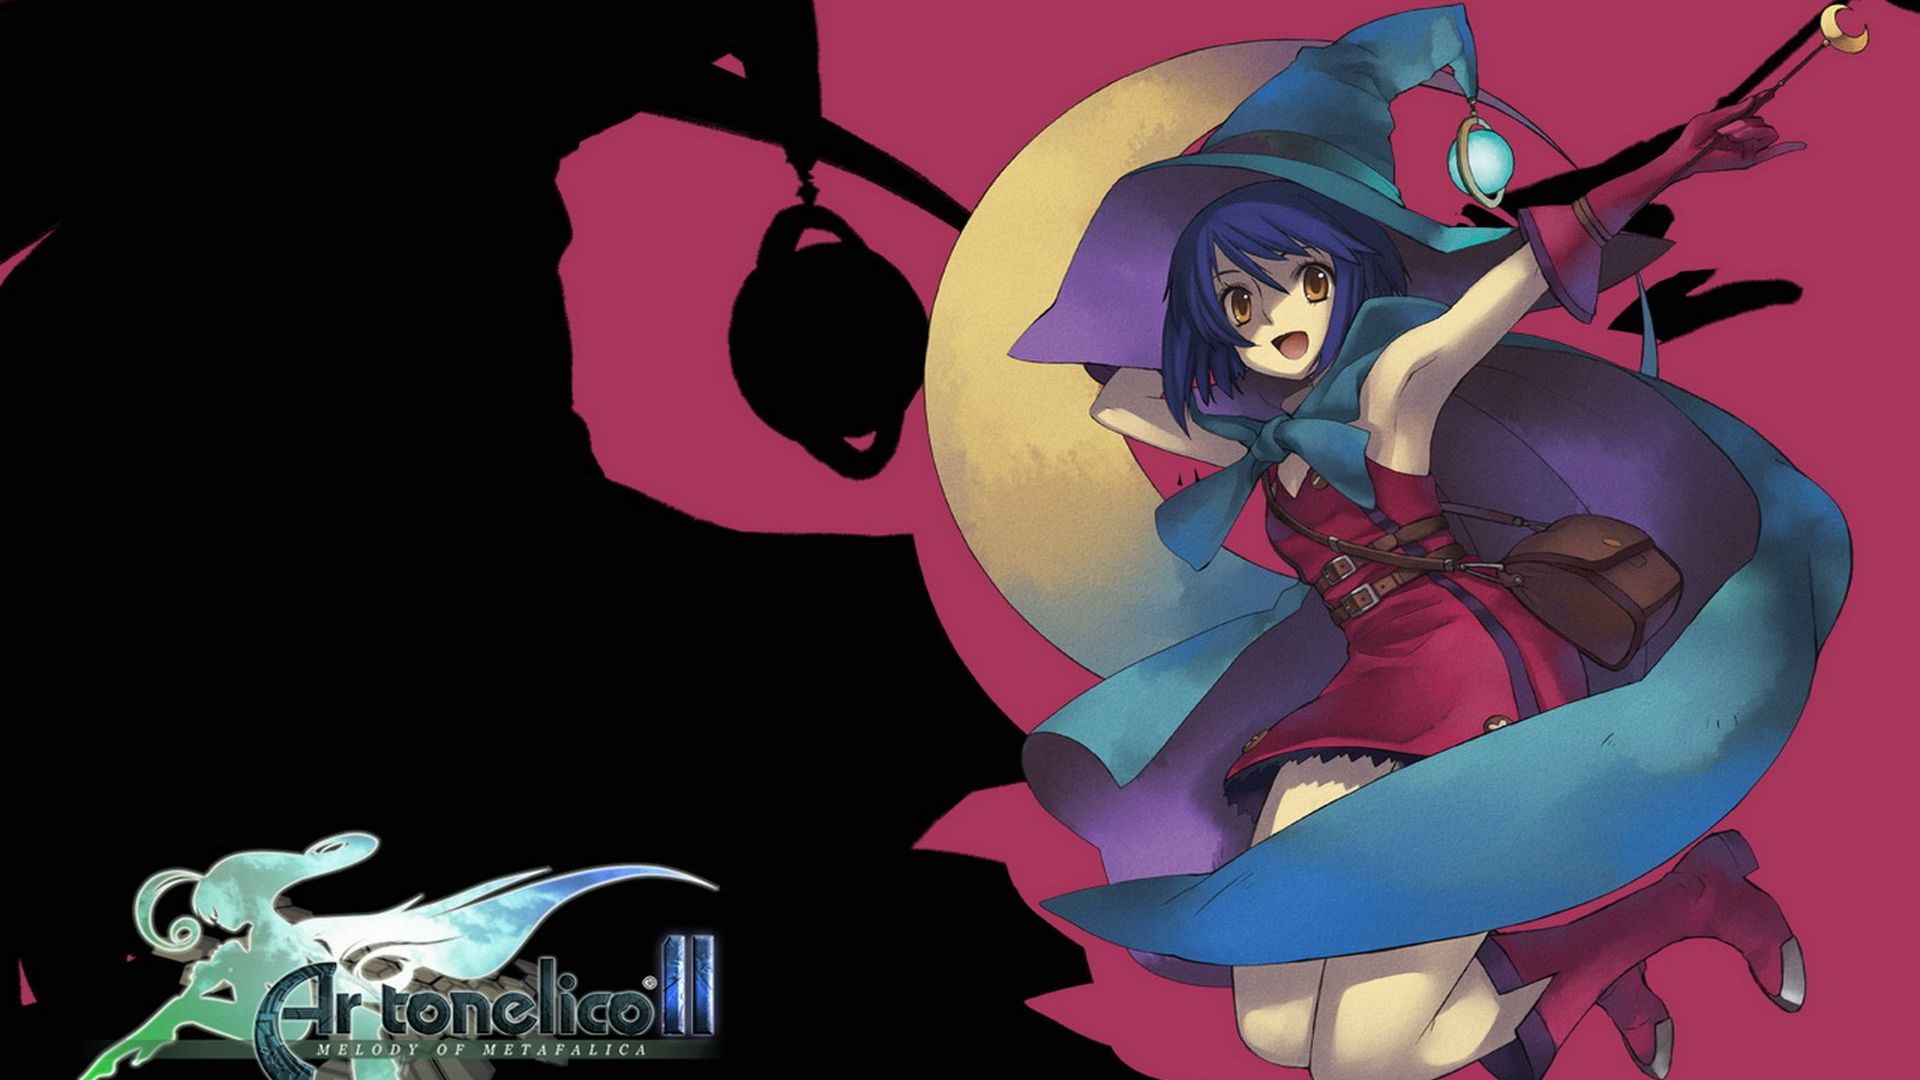 Video Game Ar tonelico II: Melody of Metafalica HD Wallpaper | Background Image